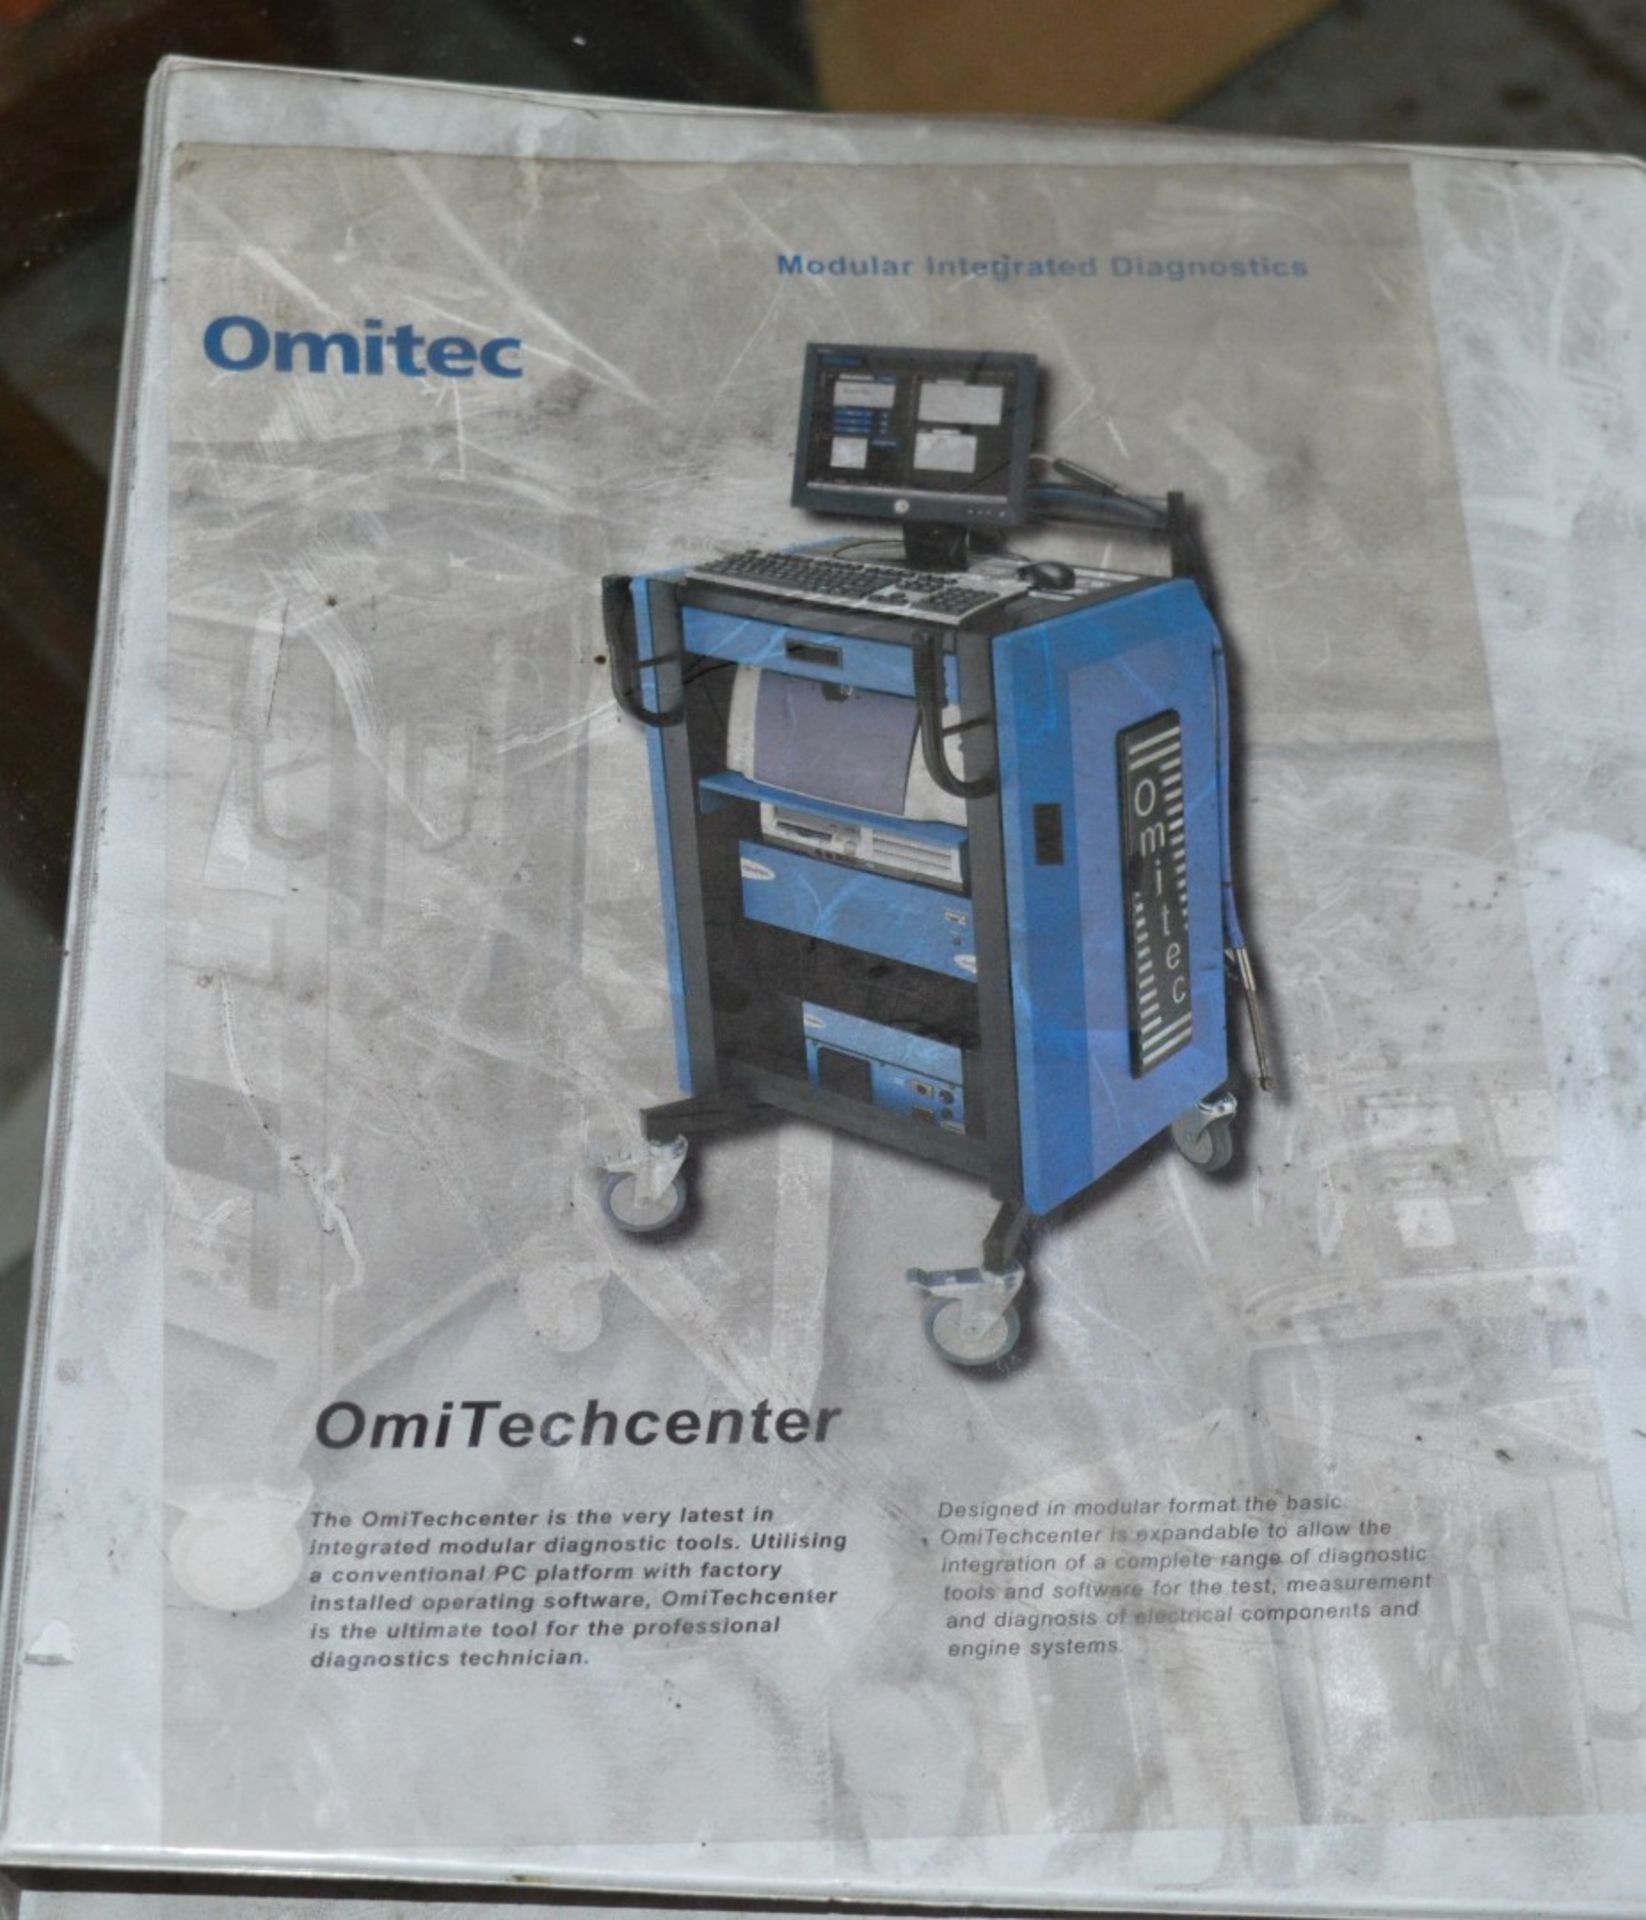 1 x Omitec OmiTechCenter Automotive Diagnostic Workstation - Please View The Pictures Provided - - Image 19 of 21